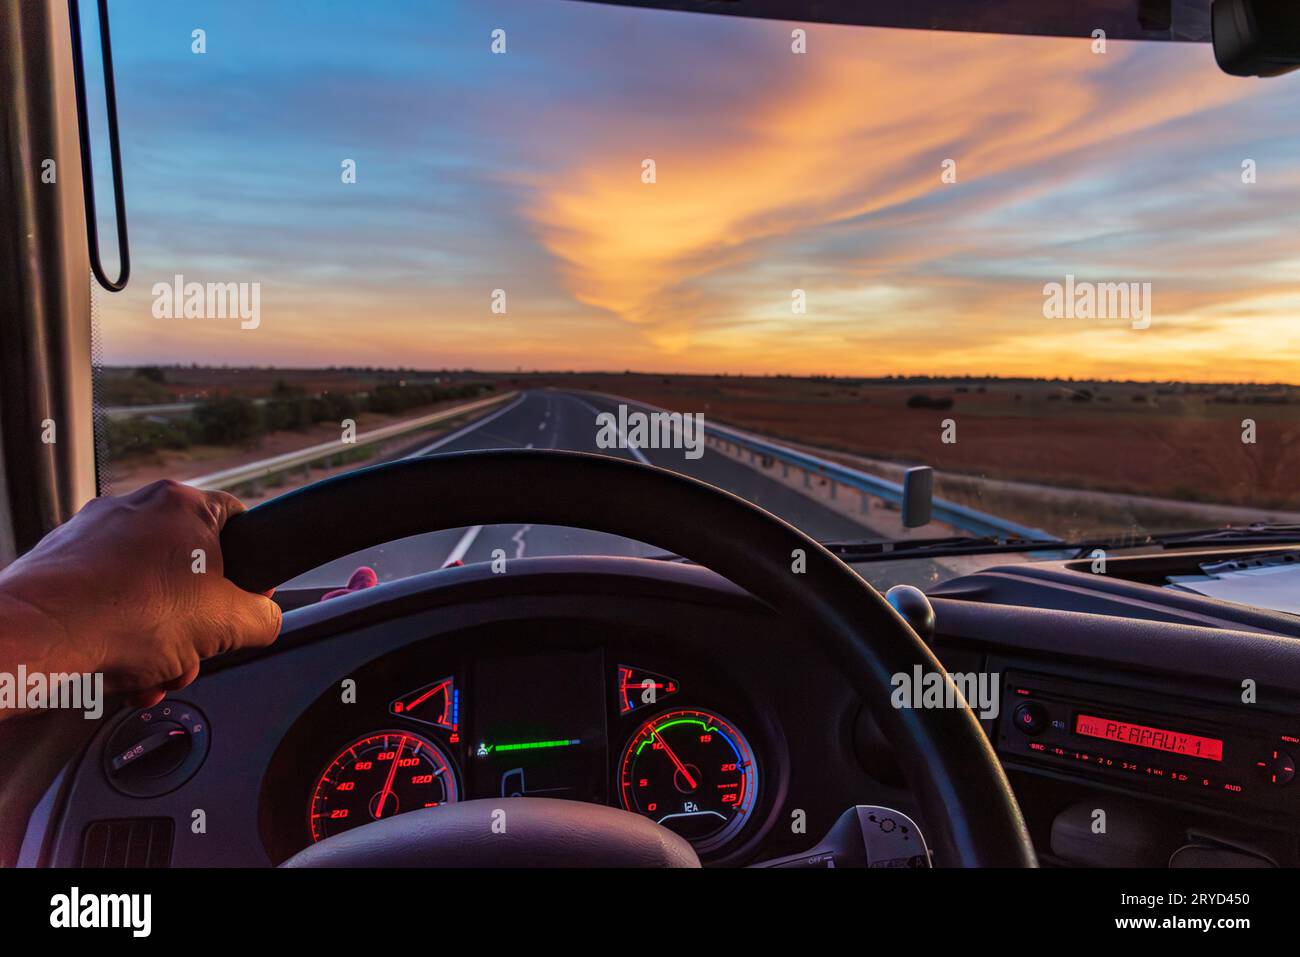 View from inside a truck of an empty highway. Stock Photo